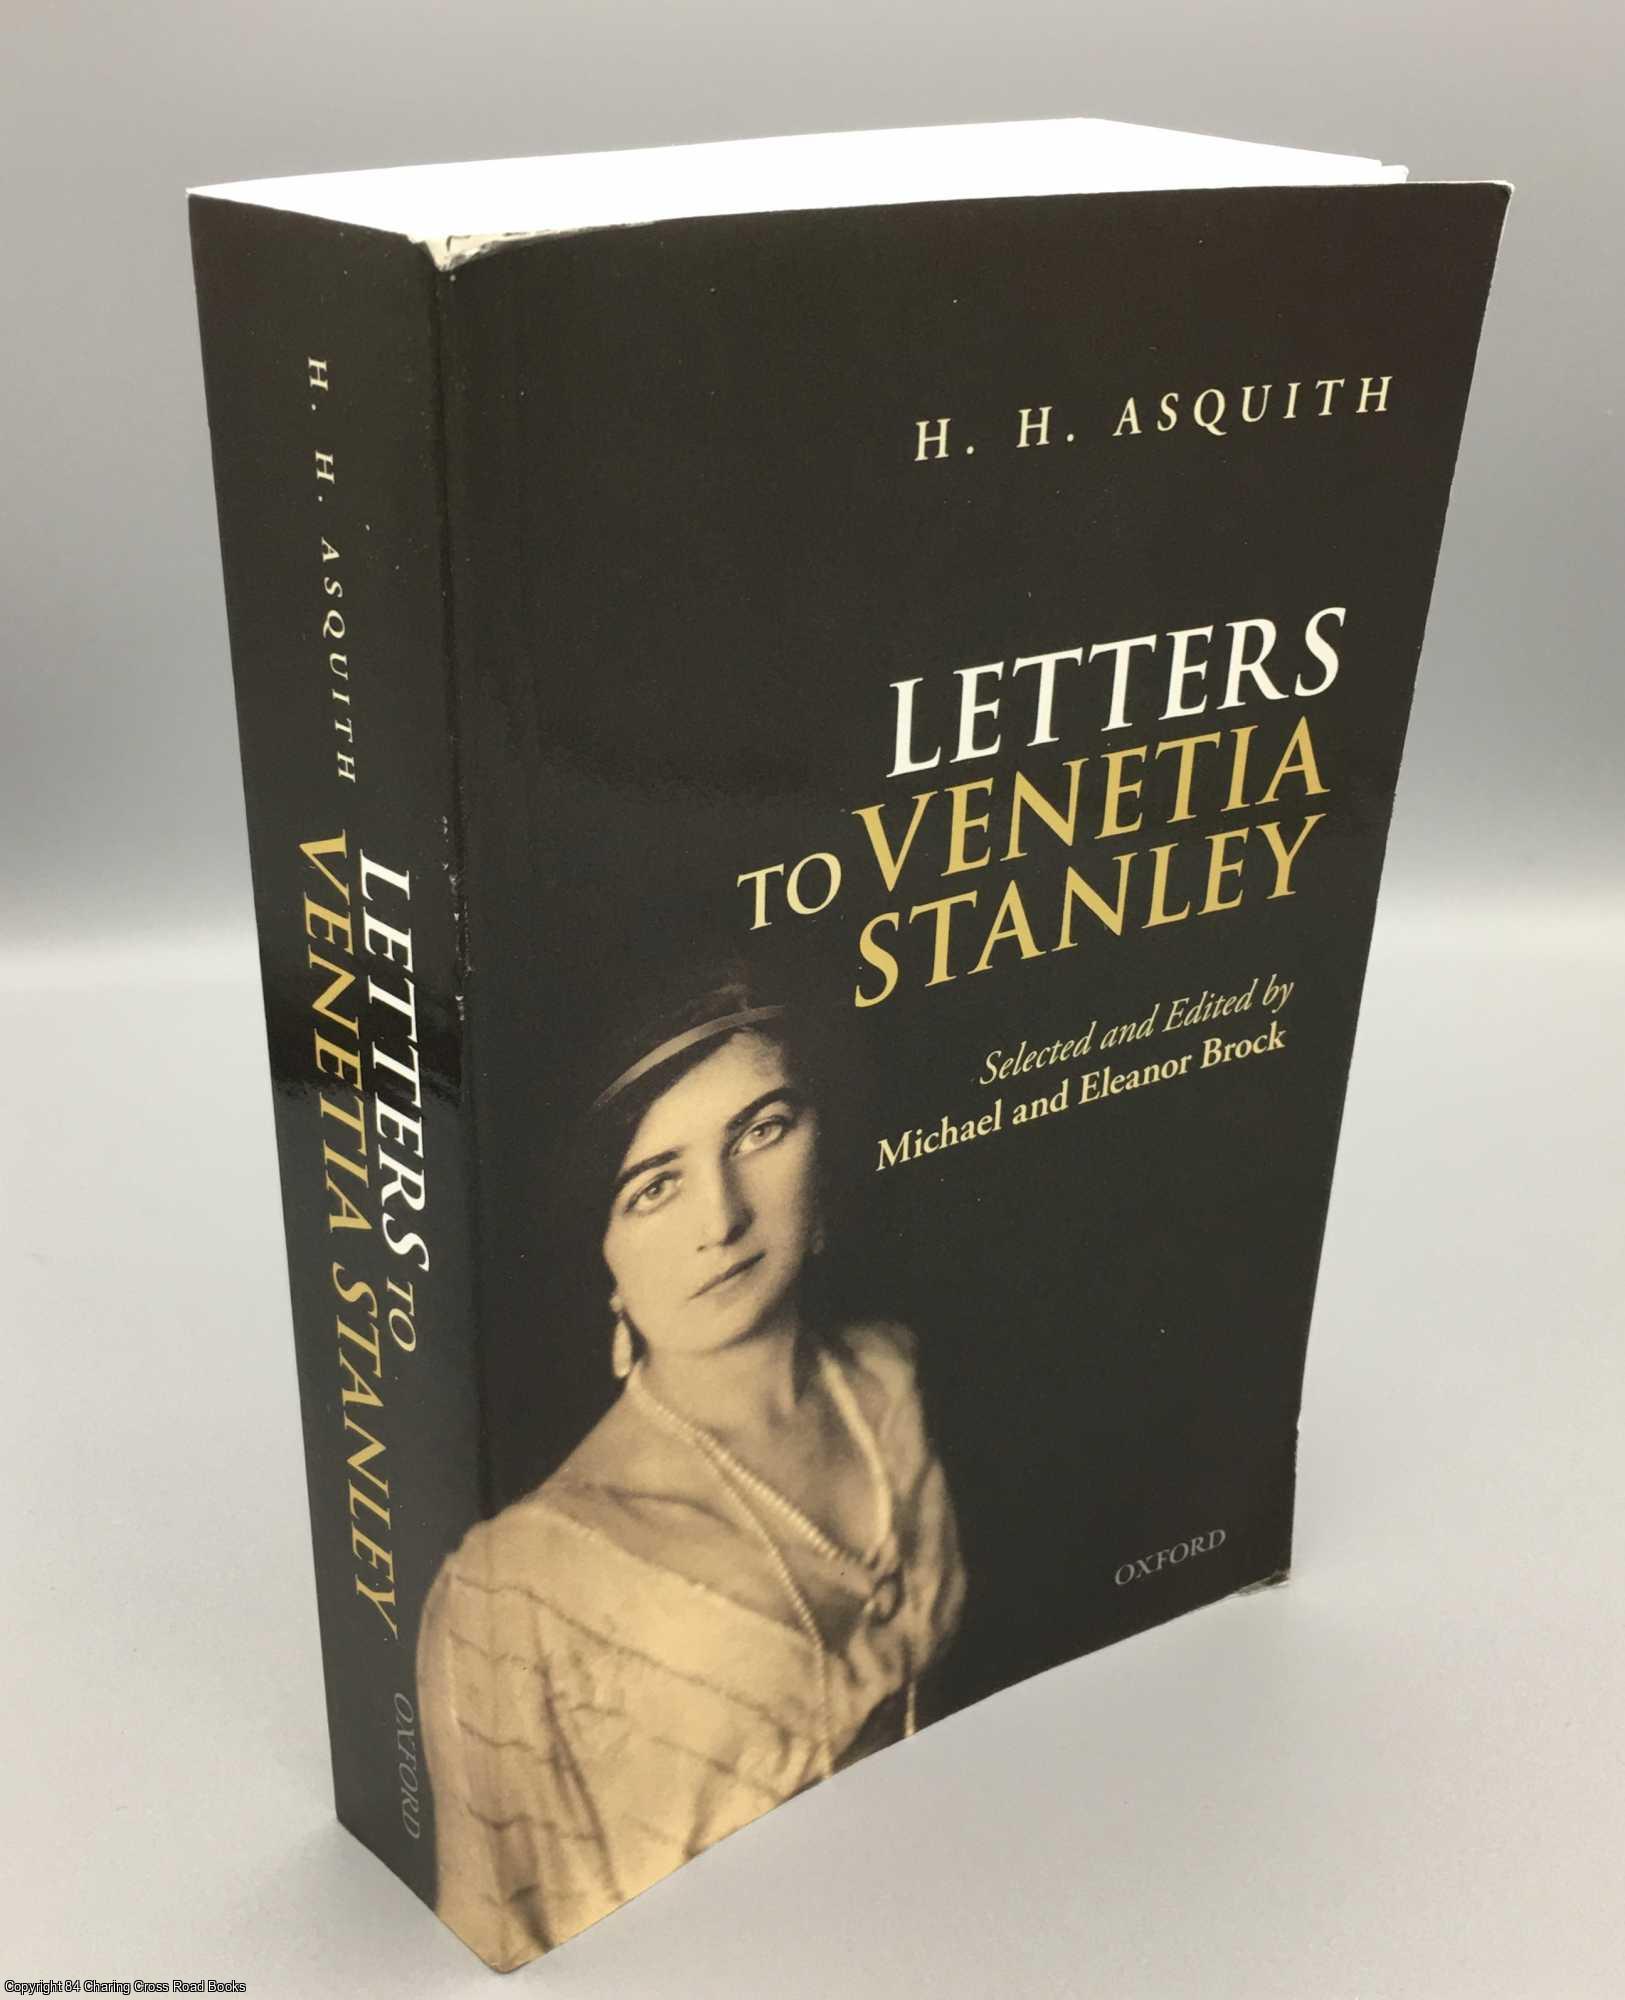 Brock, Eleanor & Michael (eds.) - H. H. Asquith Letters to Venetia Stanley